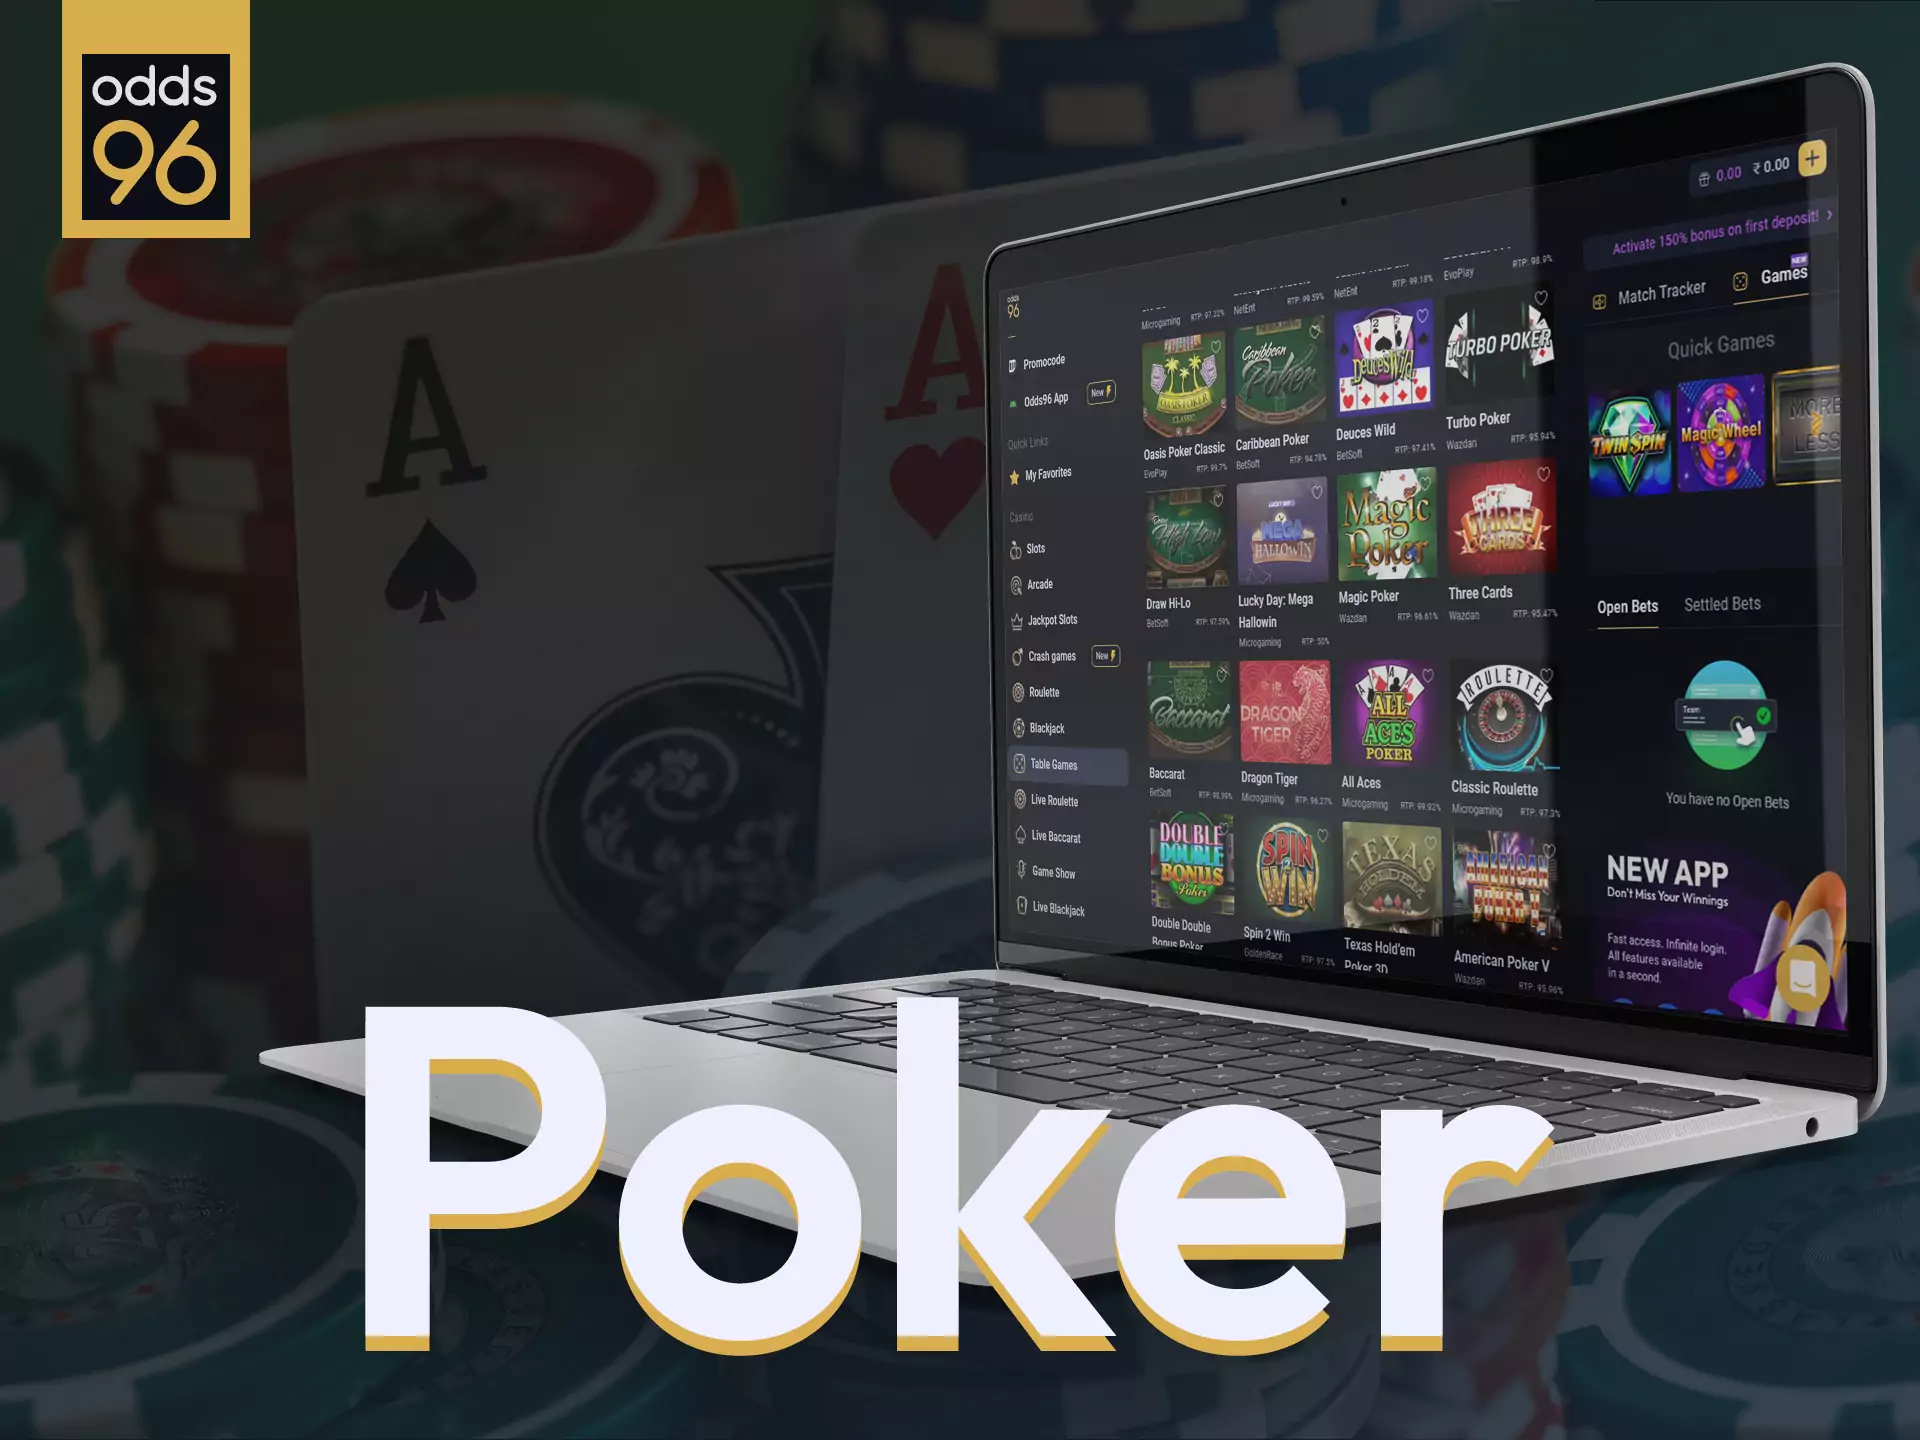 Place bets at Odds96 Casino on poker.